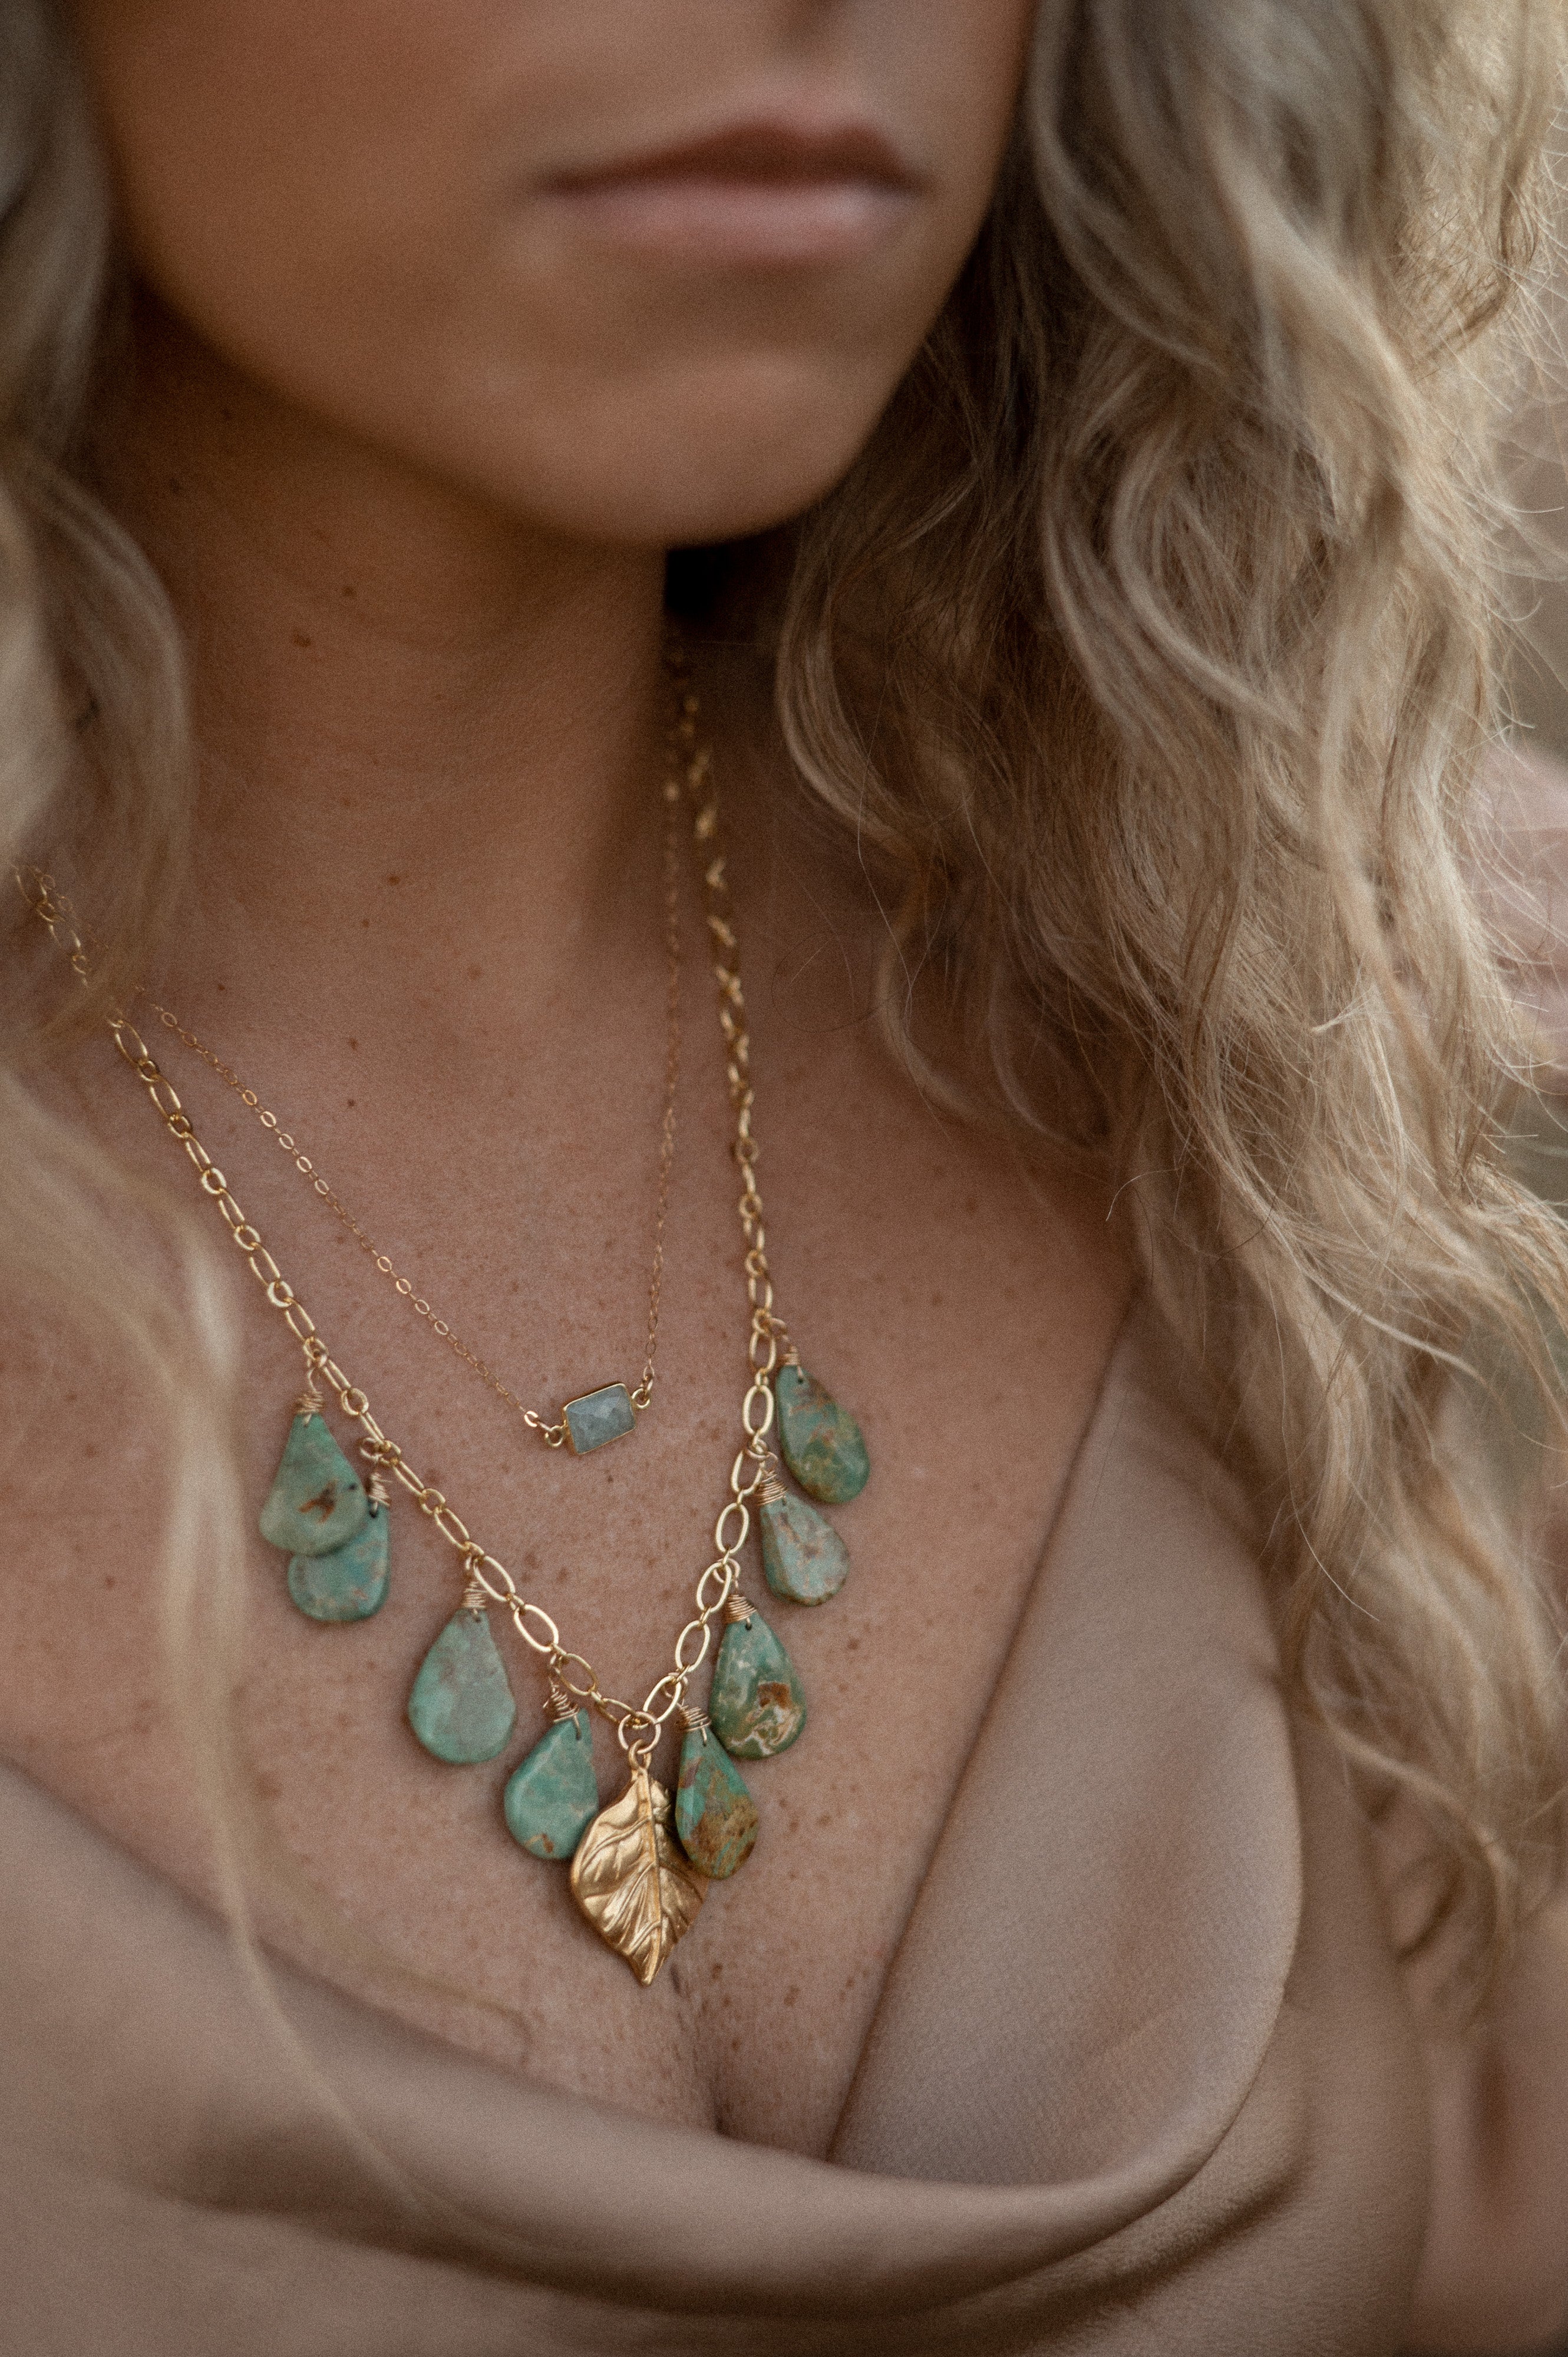 The Quaking Aspen Turquoise Necklace